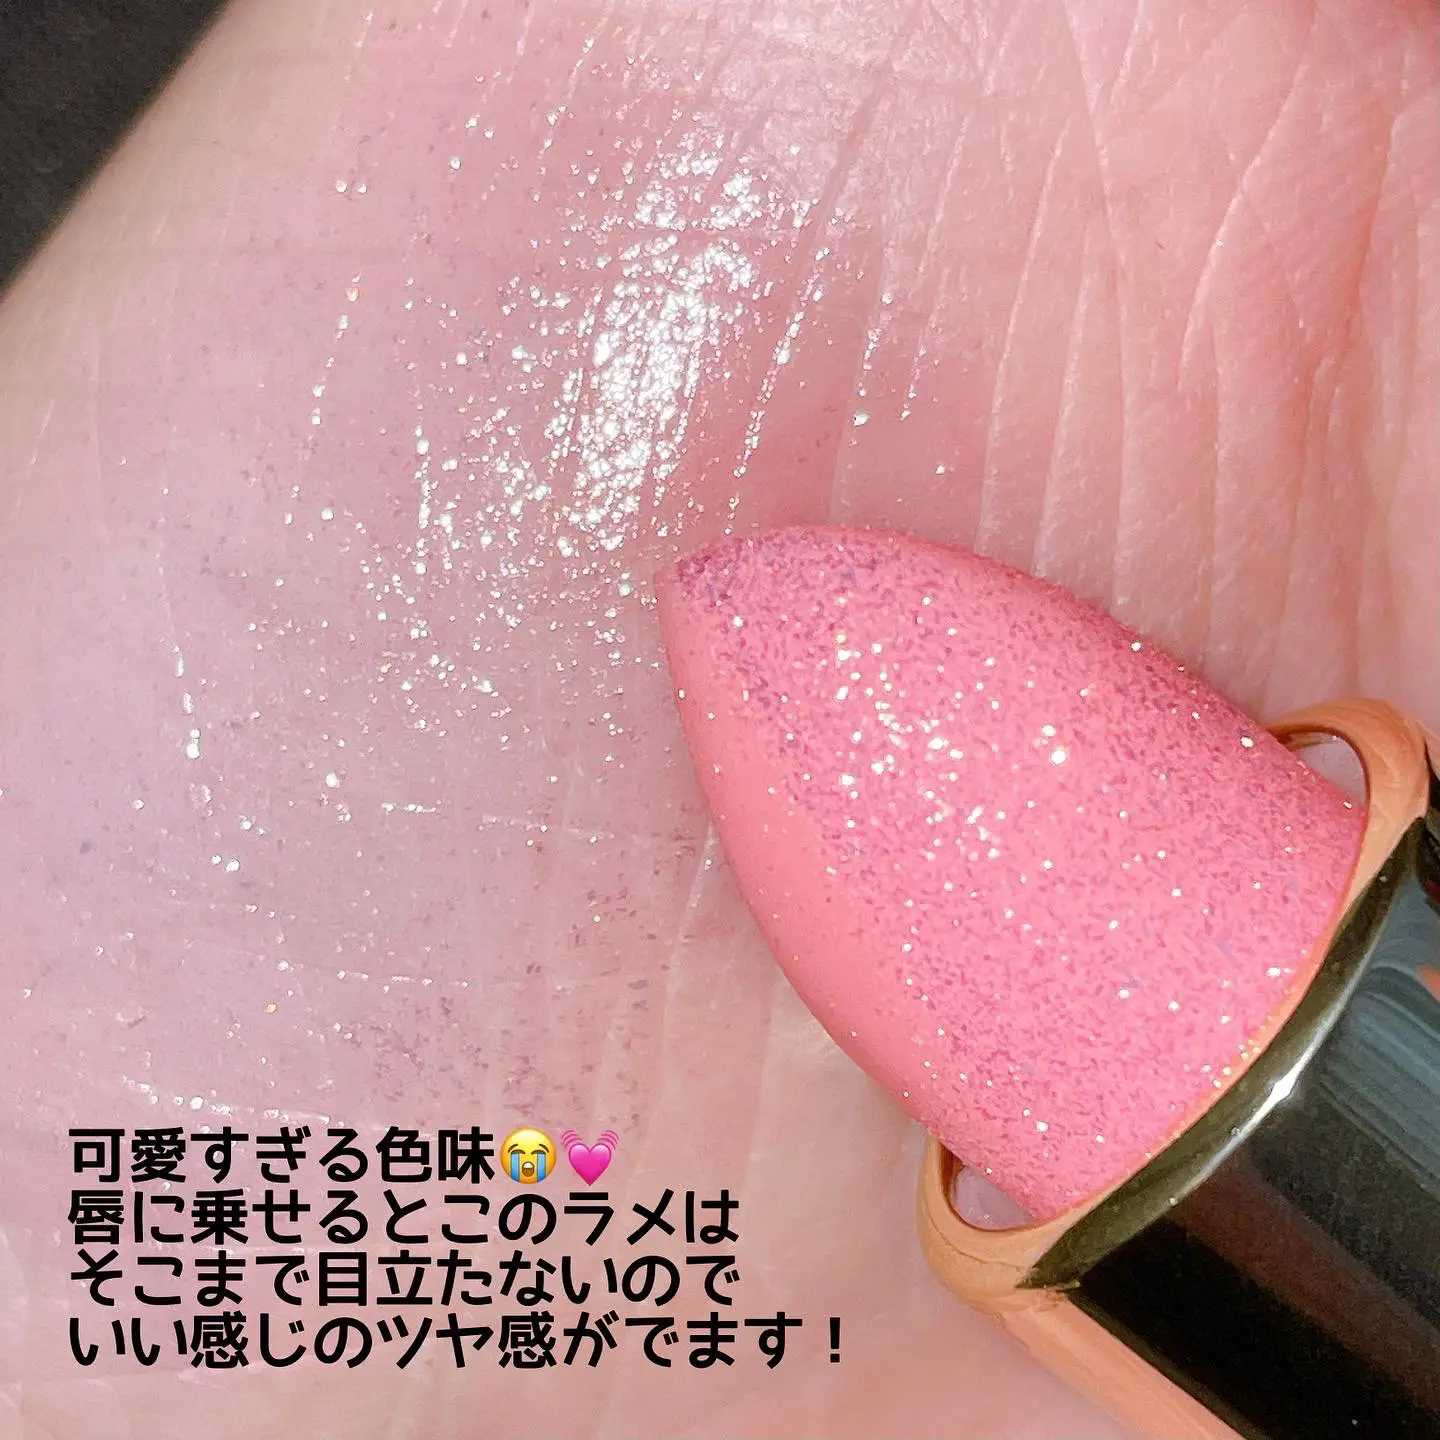 Sold out because it's too popular / Lip shining like a jewel💄💓, Gallery  posted by ここあ